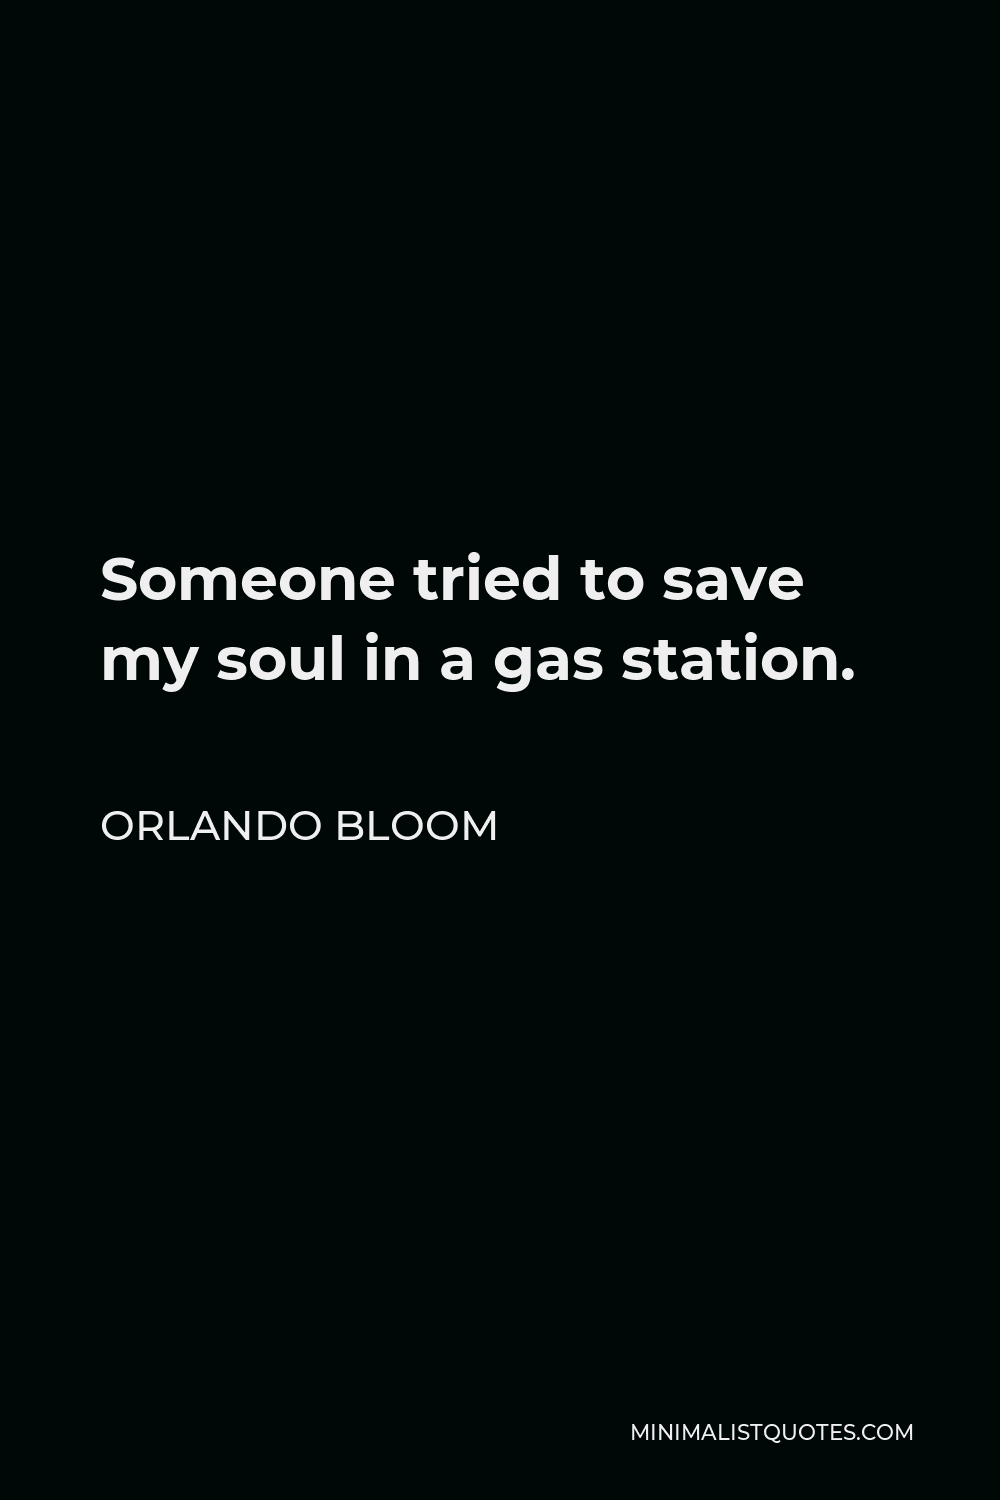 Orlando Bloom Quote - Someone tried to save my soul in a gas station.